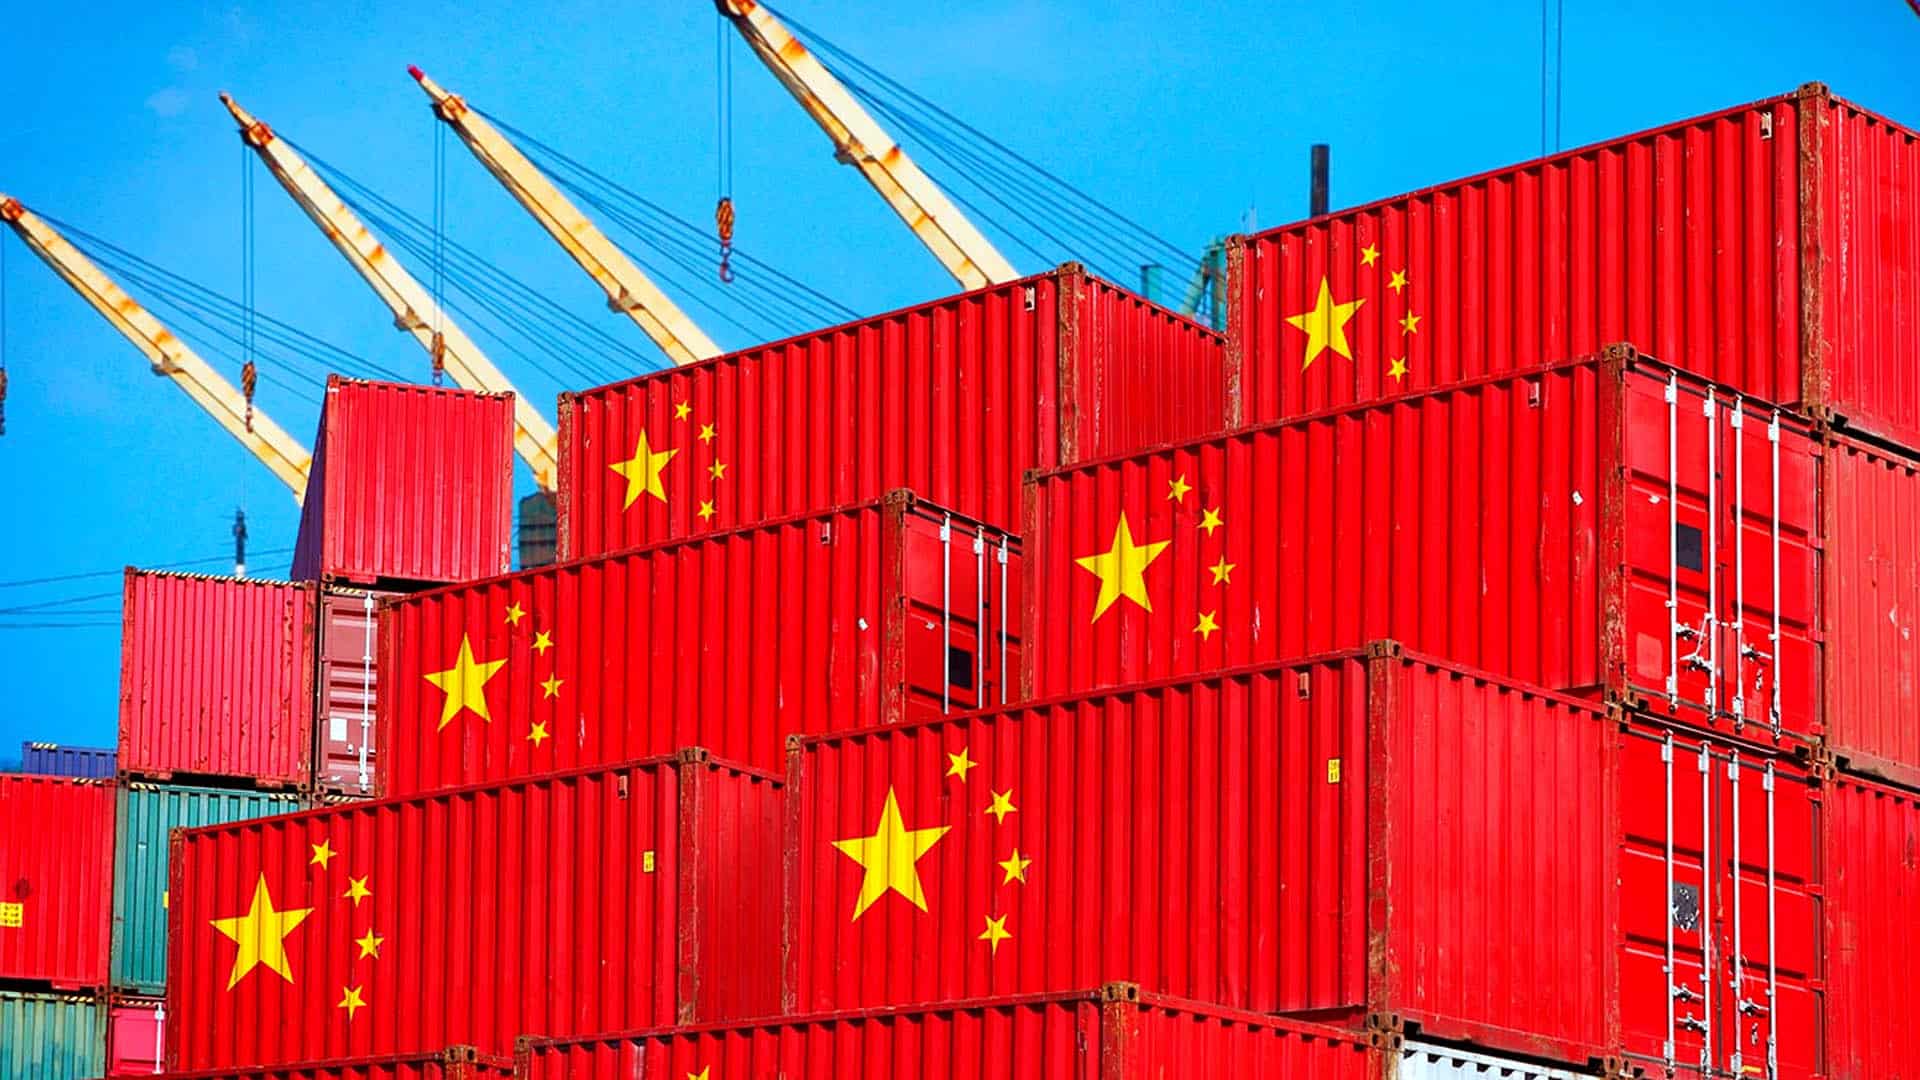 China's trade booms as global demands recover from pandemic